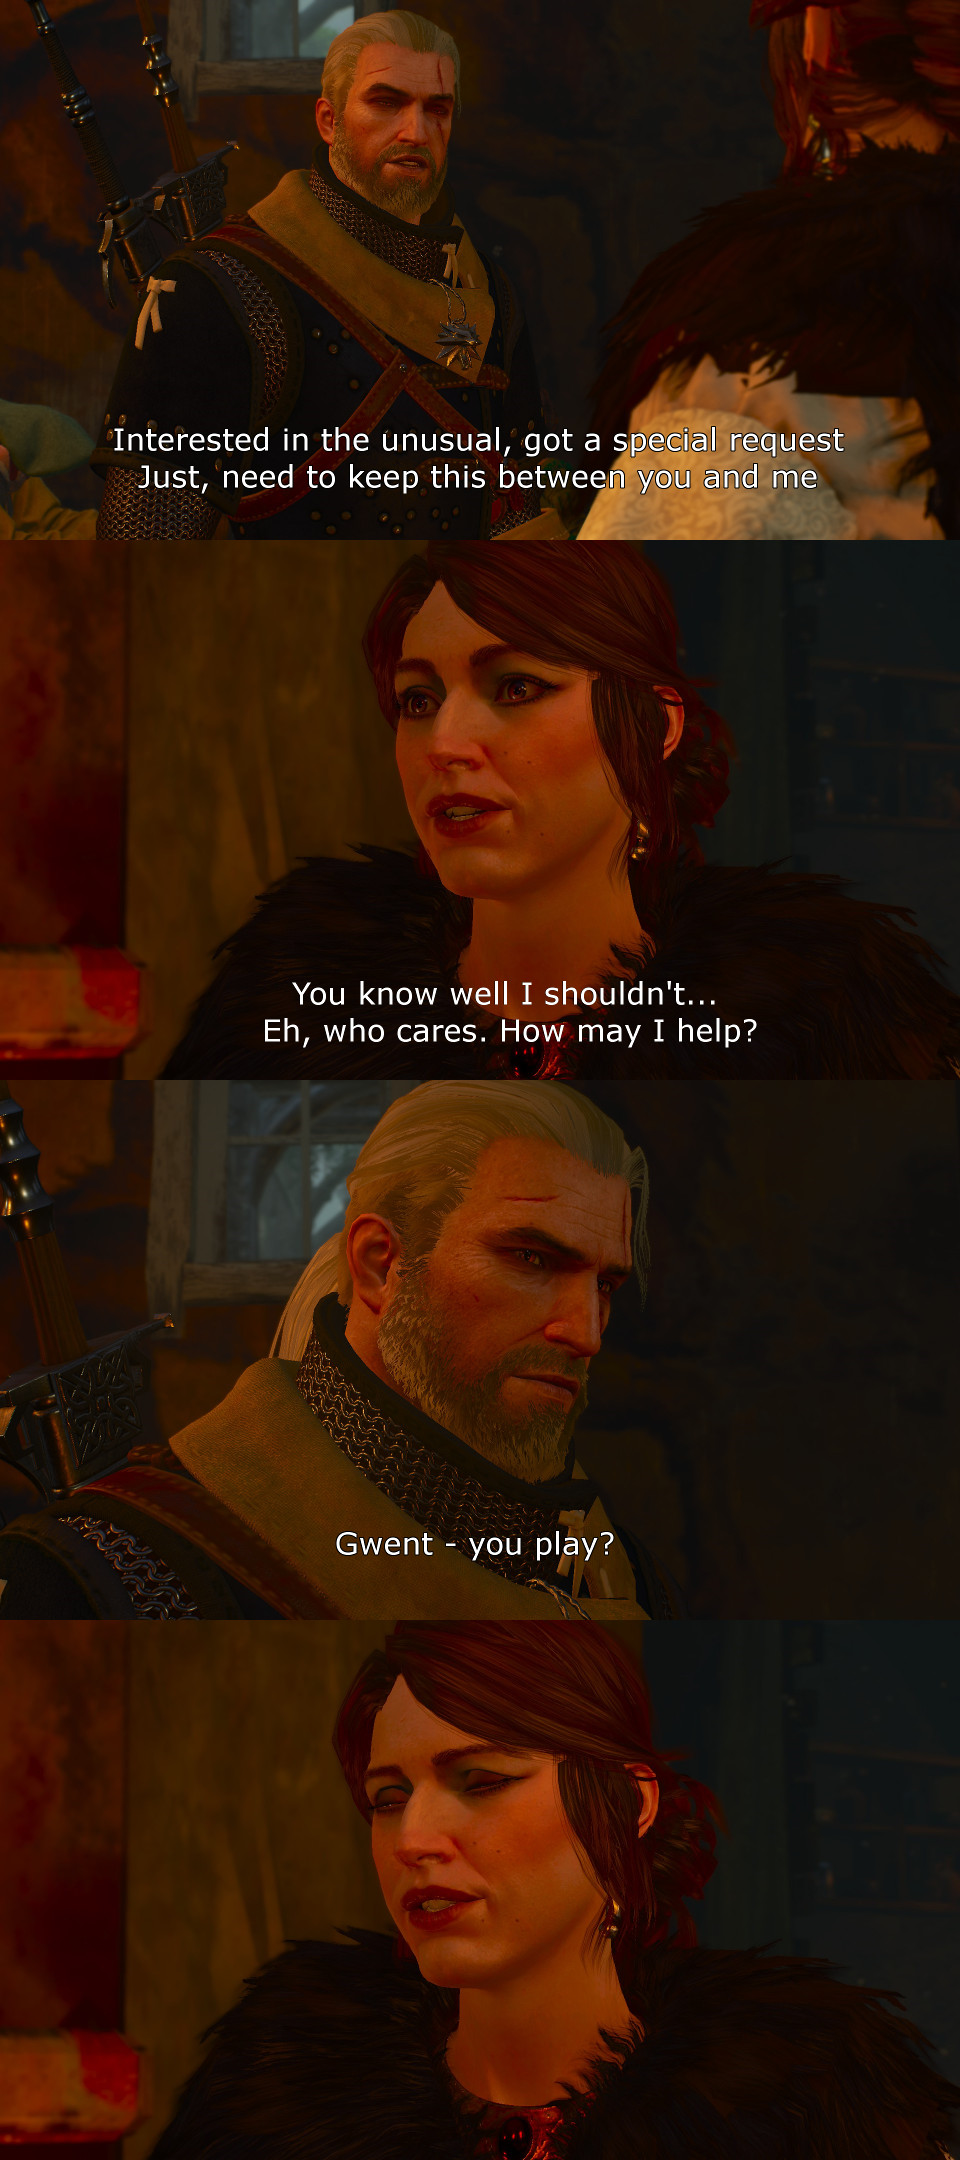 human - Interested in the unusual, got a secret Just need to keep this between die You know well I shouldn't.. Eh, who cares. How may I help? Gwent you play?